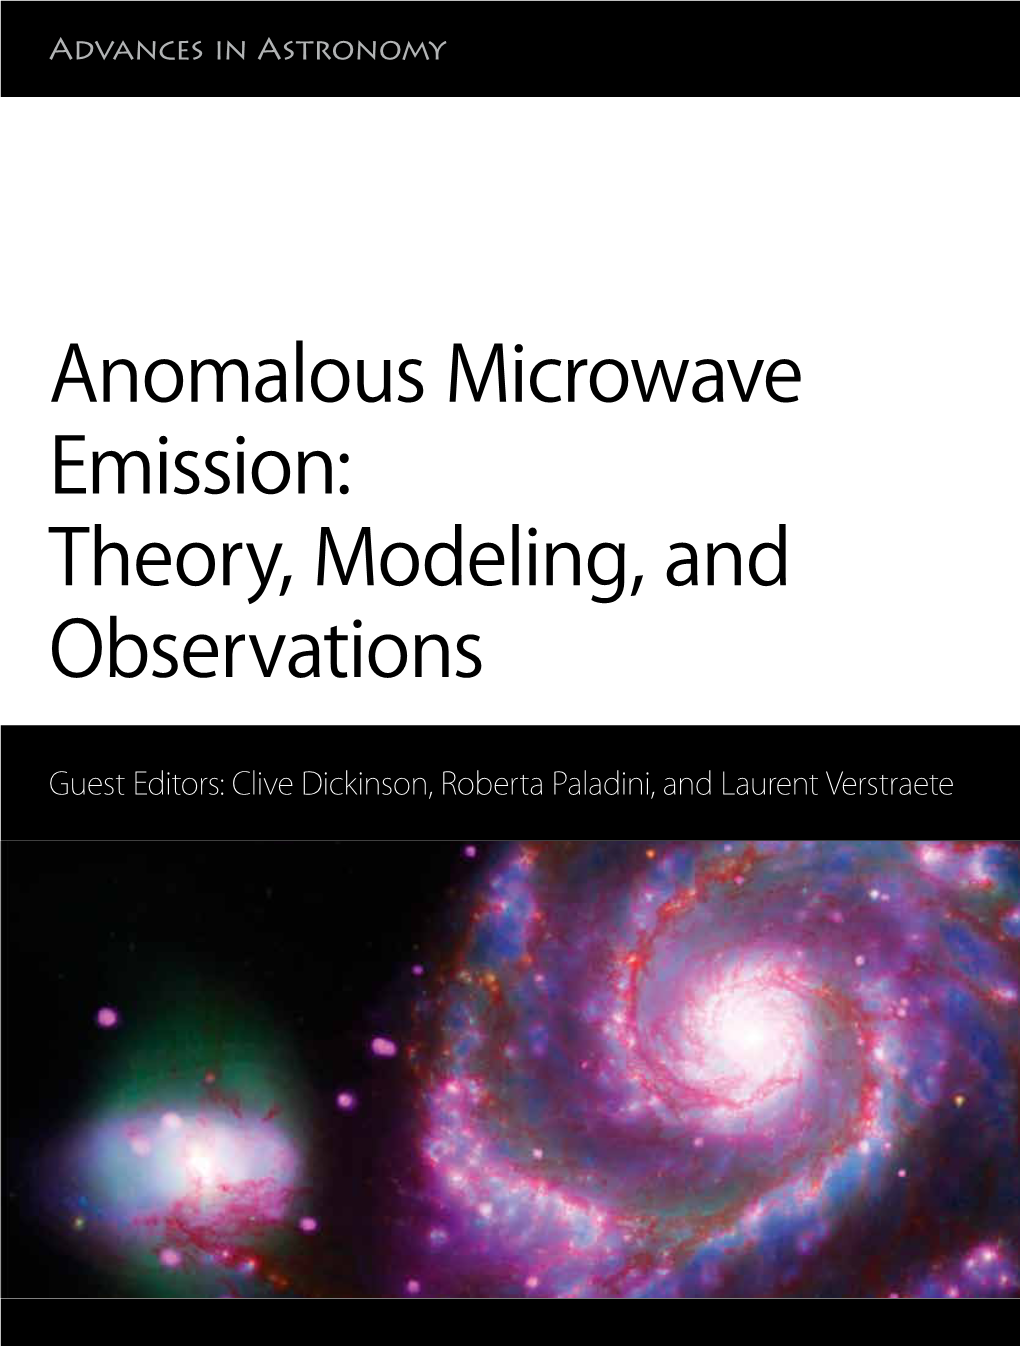 Anomalous Microwave Emission: Theory, Modeling, and Observations